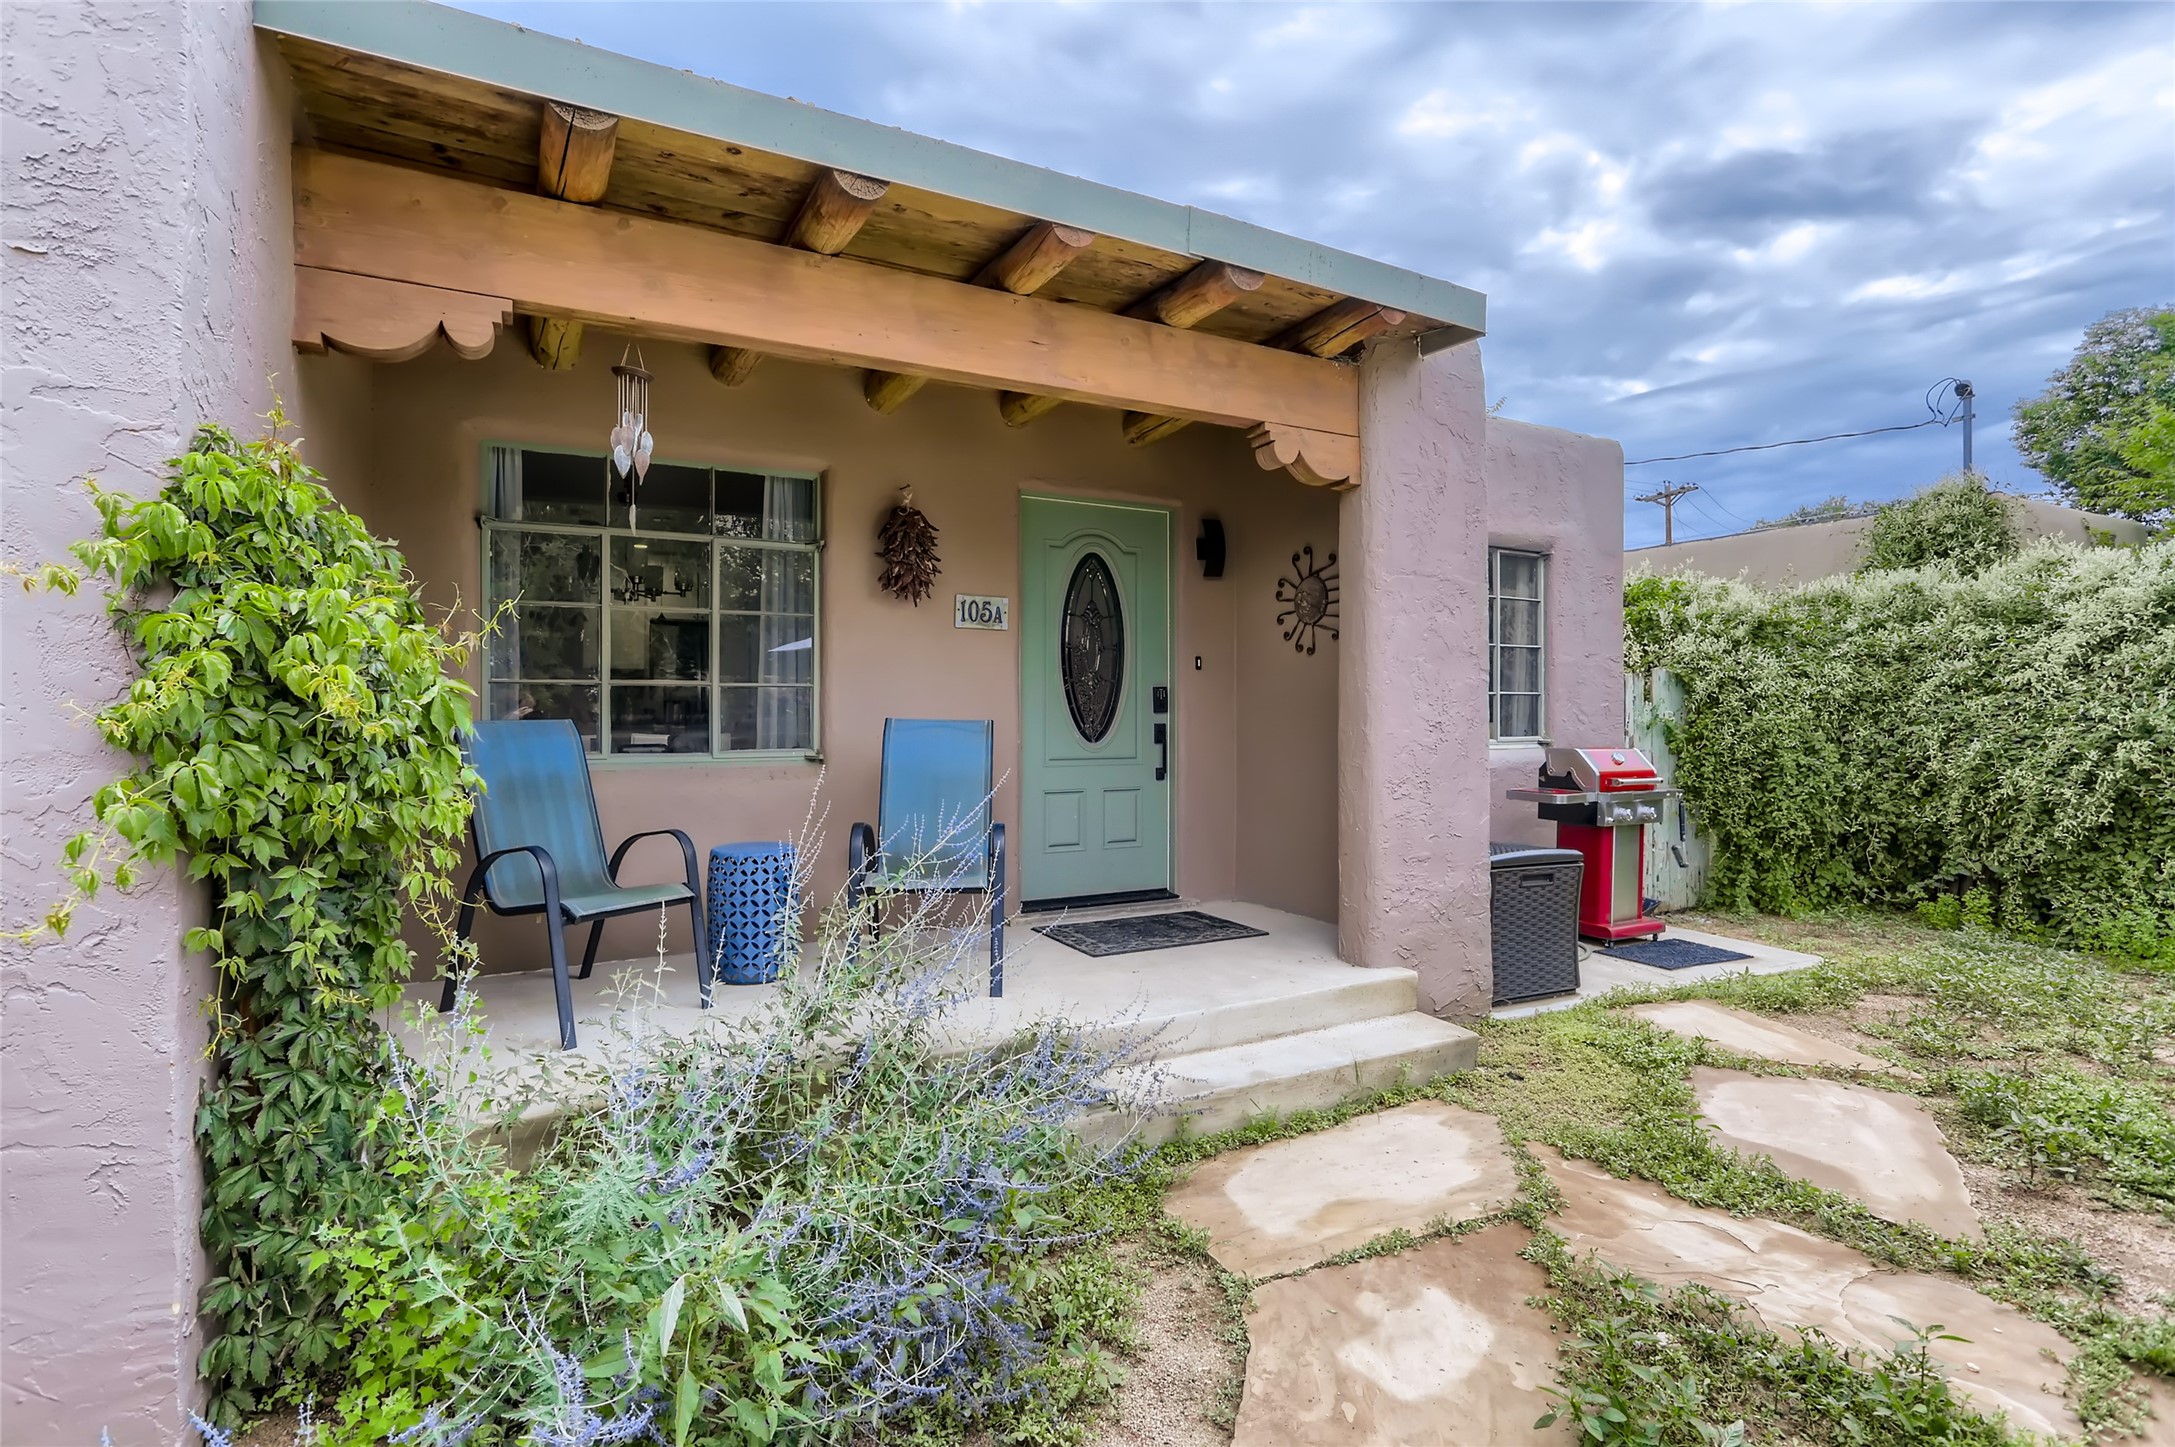 105 Spruce Street, Santa Fe, New Mexico 87501, 3 Bedrooms Bedrooms, ,3 BathroomsBathrooms,Residential,For Sale,105 Spruce Street,202232327